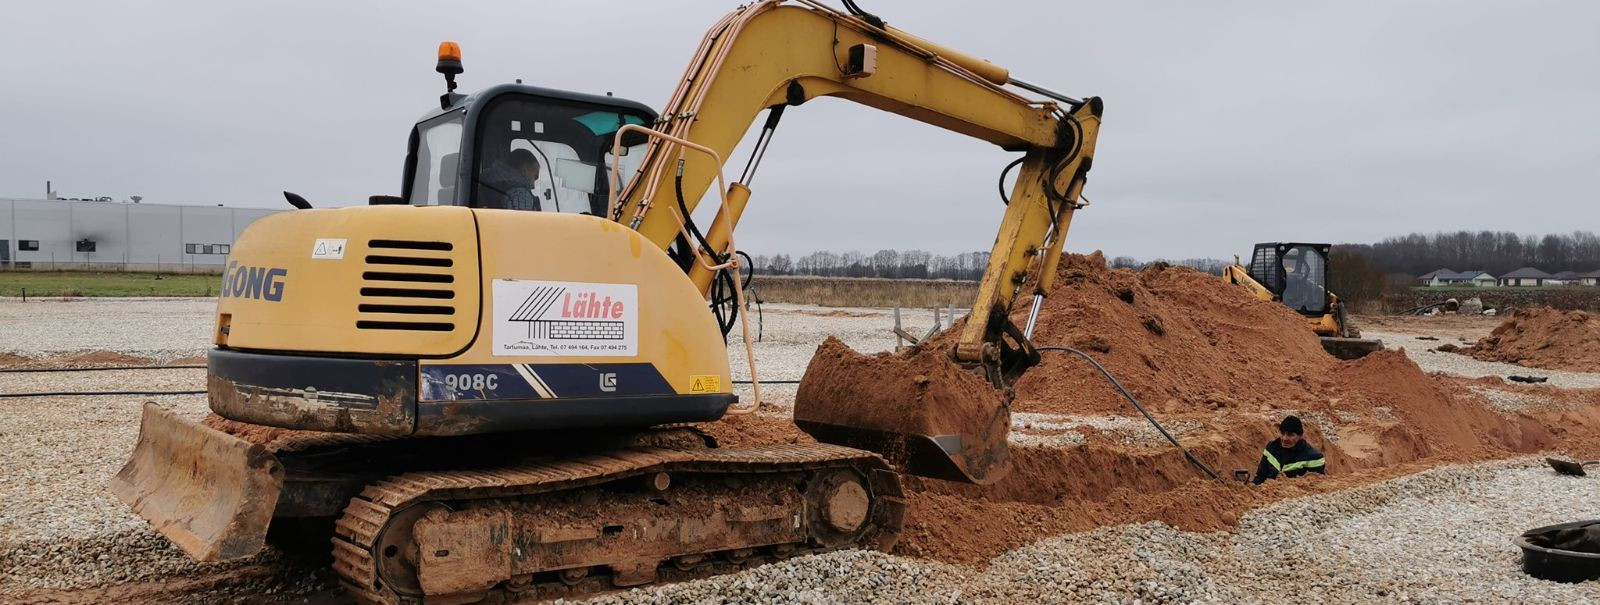 Excavators are a staple in construction projects, known for their versatility and ability to perform a range of tasks from digging trenches to demolition. They 